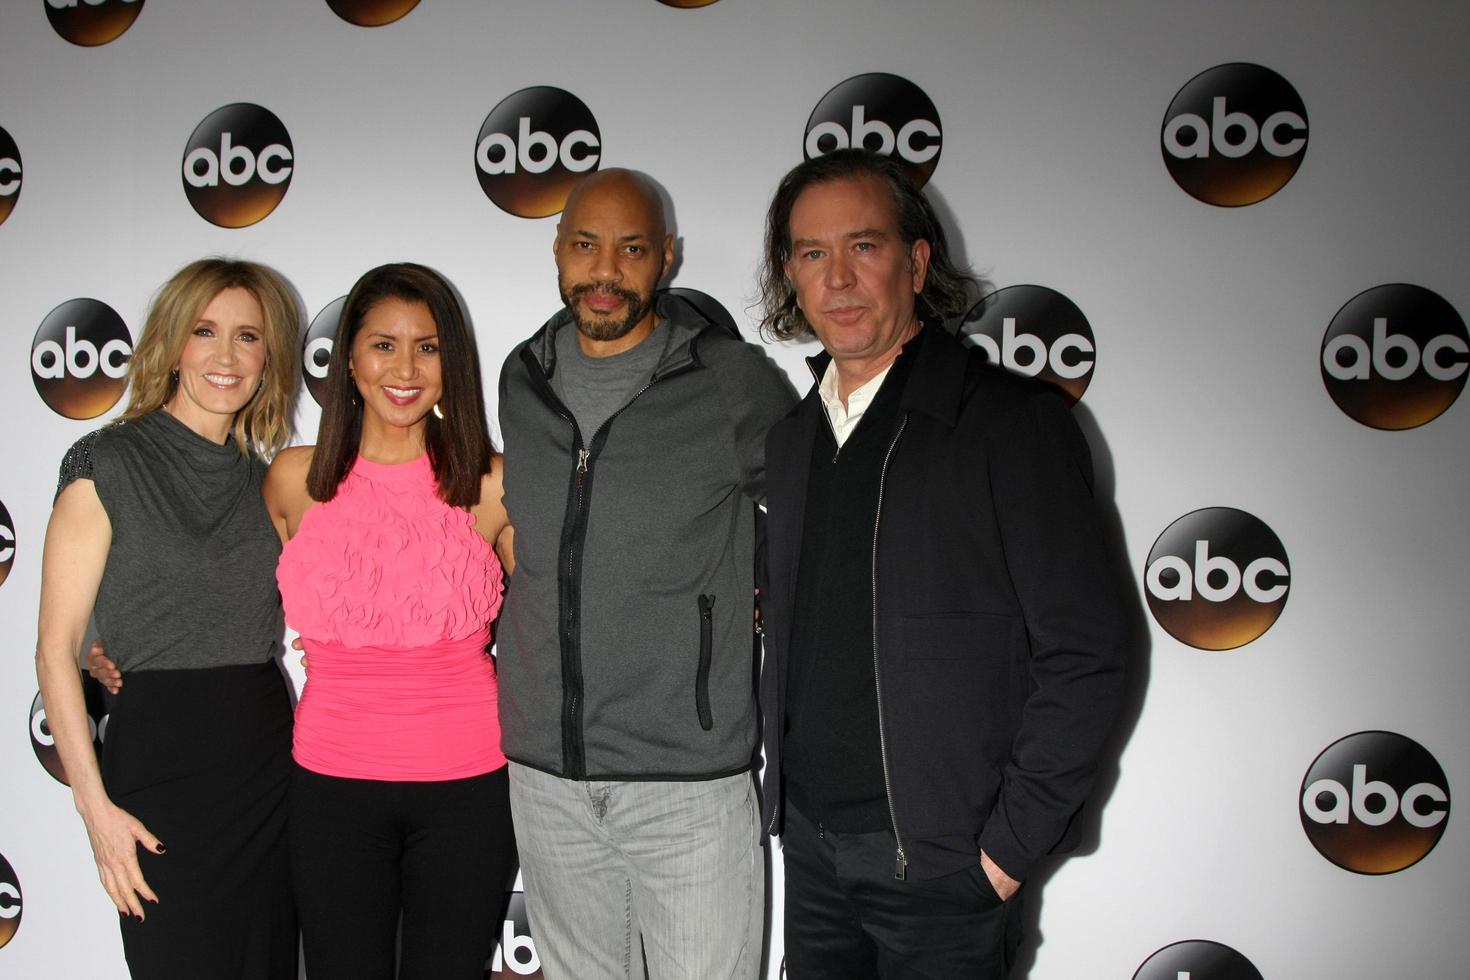 LOS ANGELES  JAN 14 - Felicity Huffman, unknown, John Ridley, Timothy Hutton at the ABC TCA Winter 2015 at a The Langham Huntington Hotel on January 14, 2015 in Pasadena, CA photo